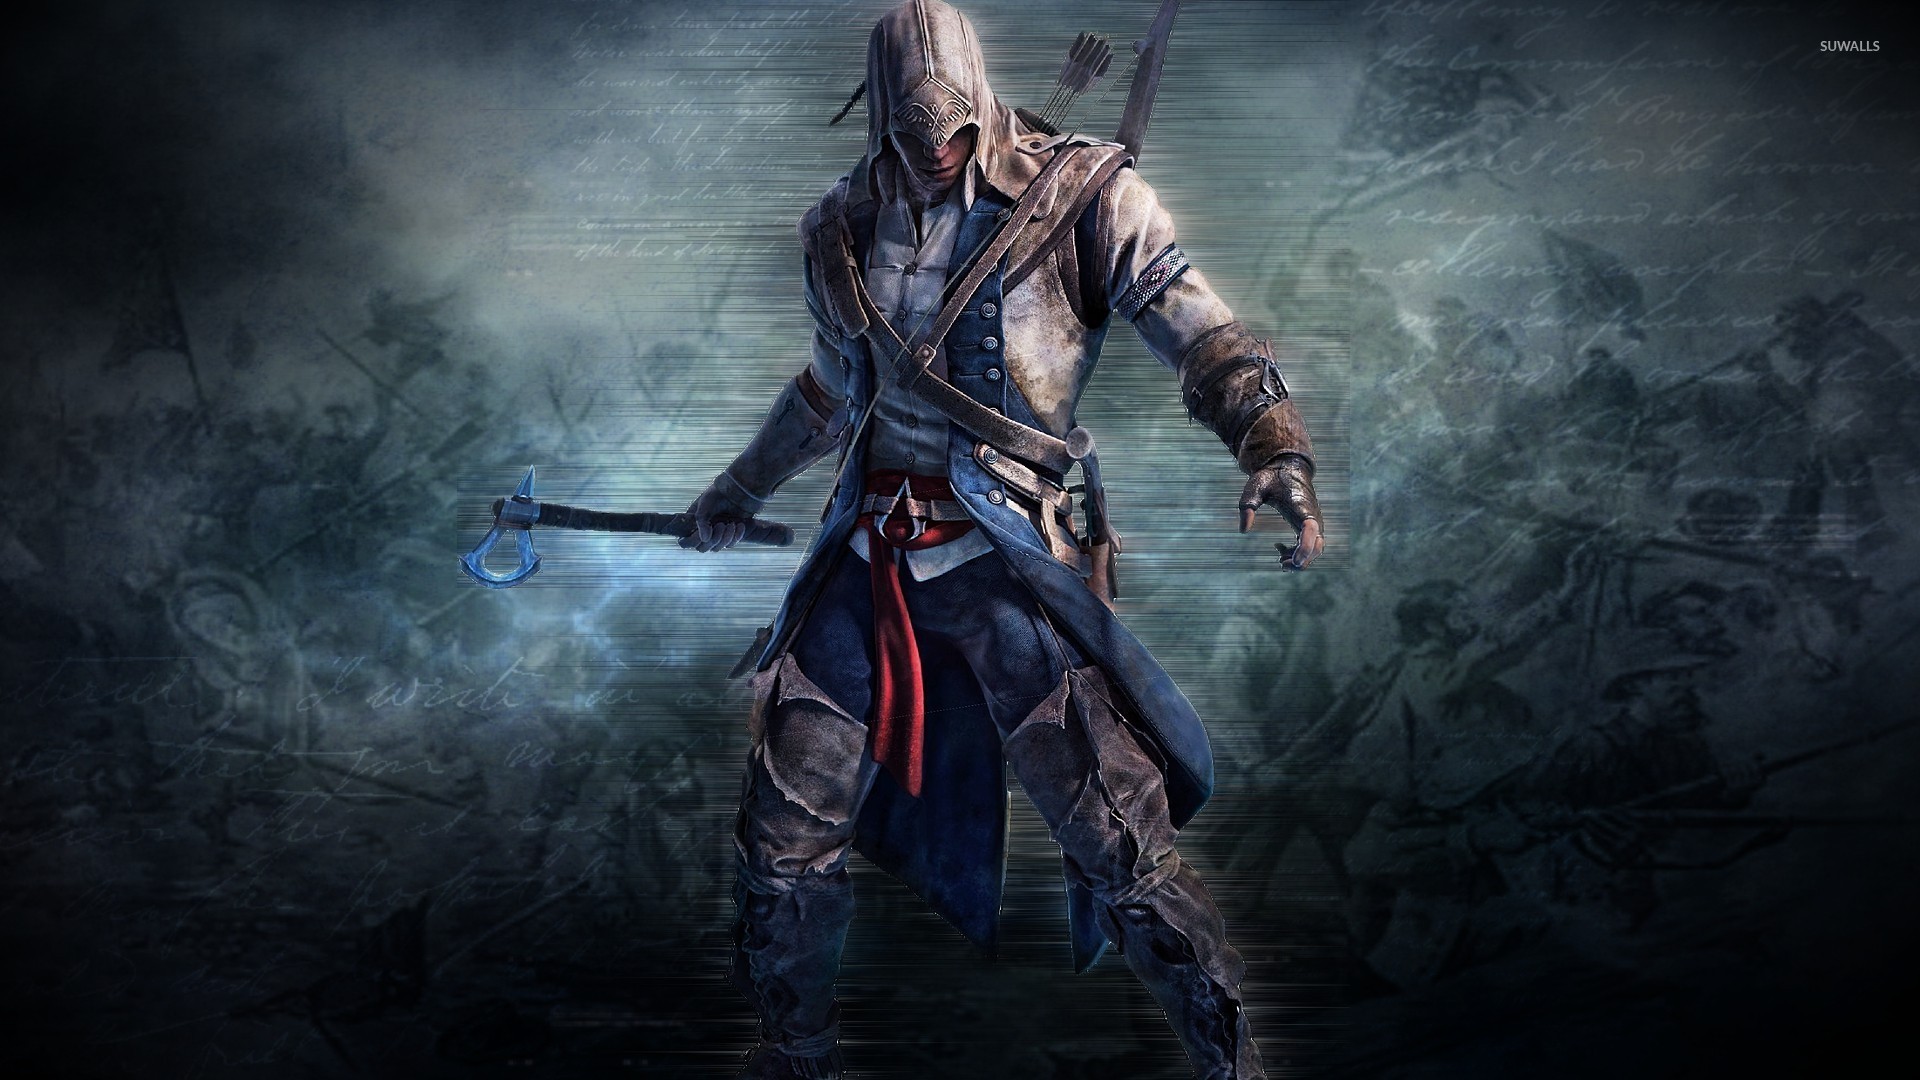 1920x1080 Connor Kenway with an ax - Assassin's Creed III wallpaper